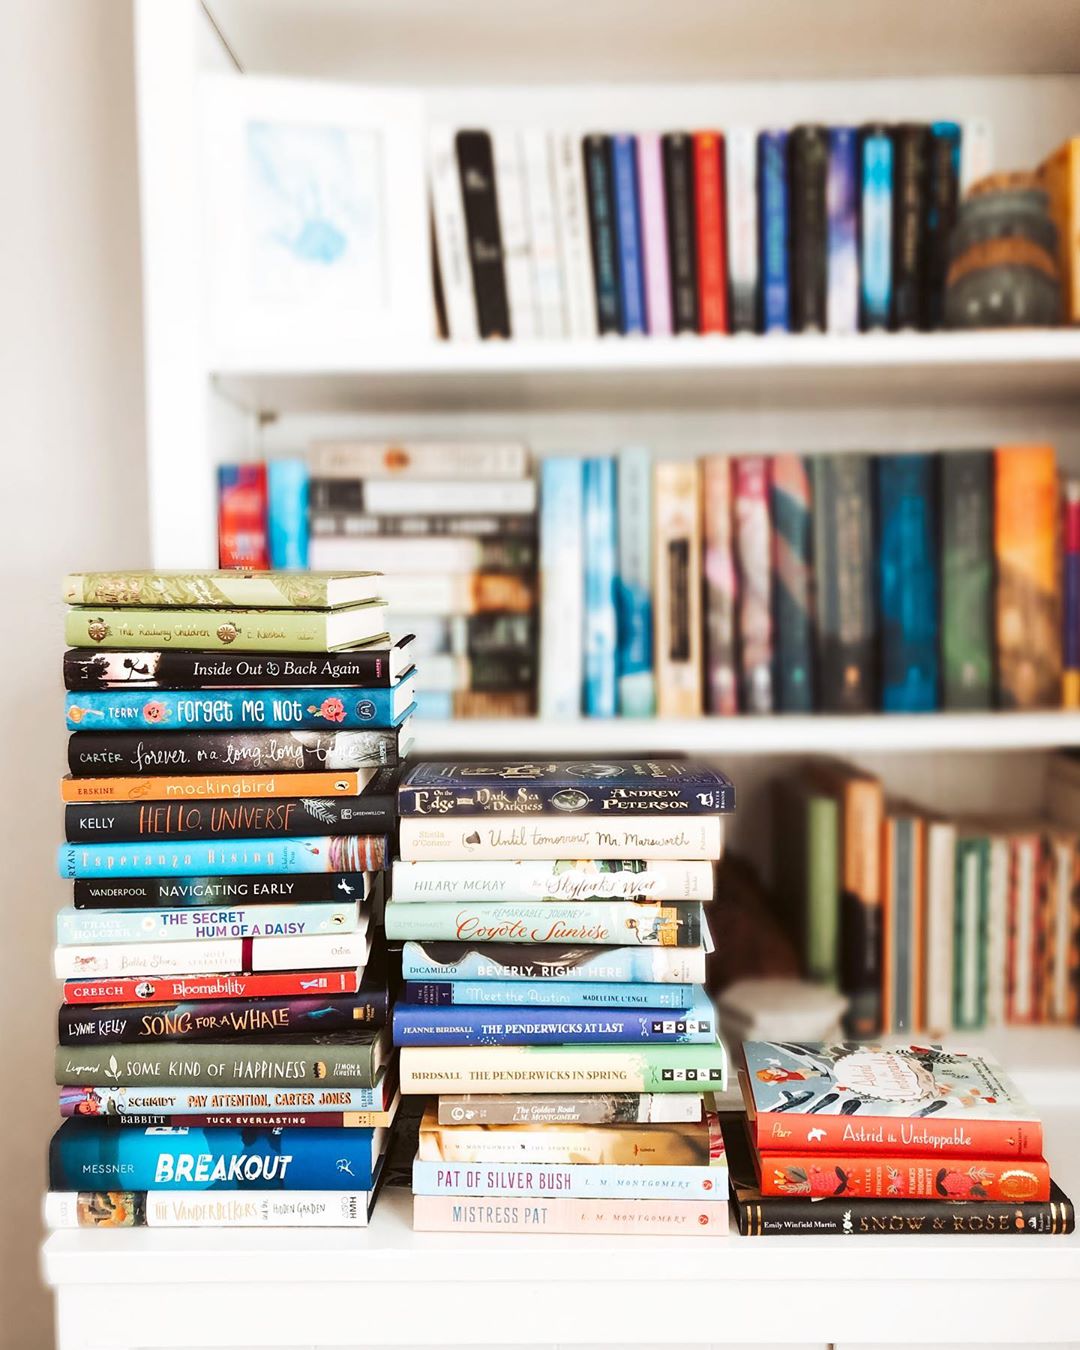 Books stacked by a bookshelf. Photo by Instagram user @lifebetweenwords